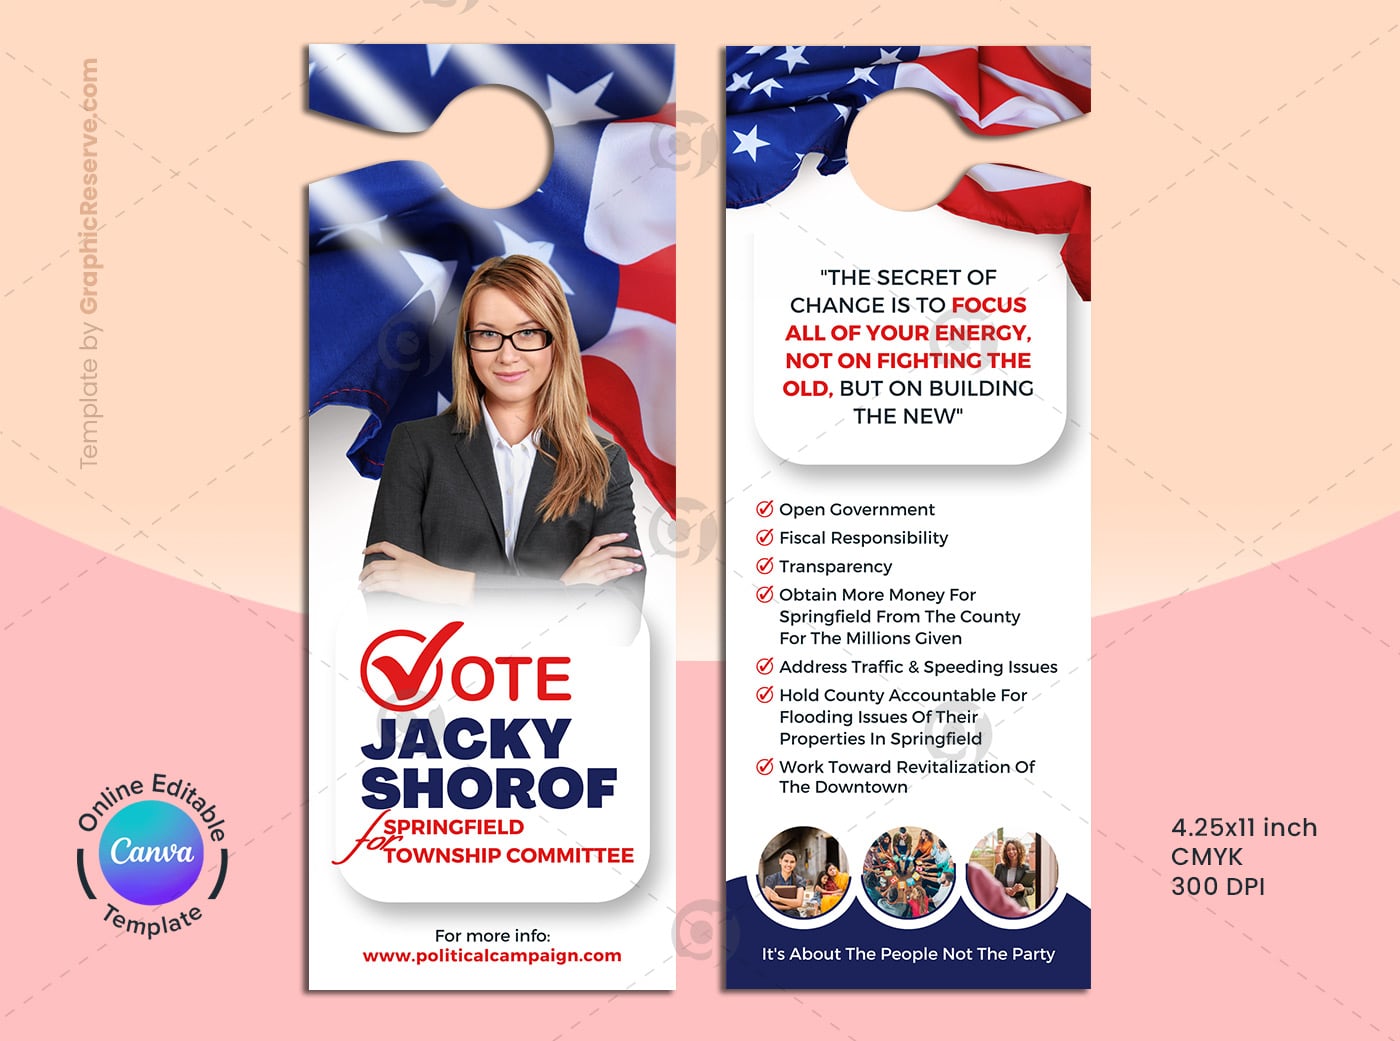 Election Campaign Political Door Hanger Canva Template Graphic Reserve